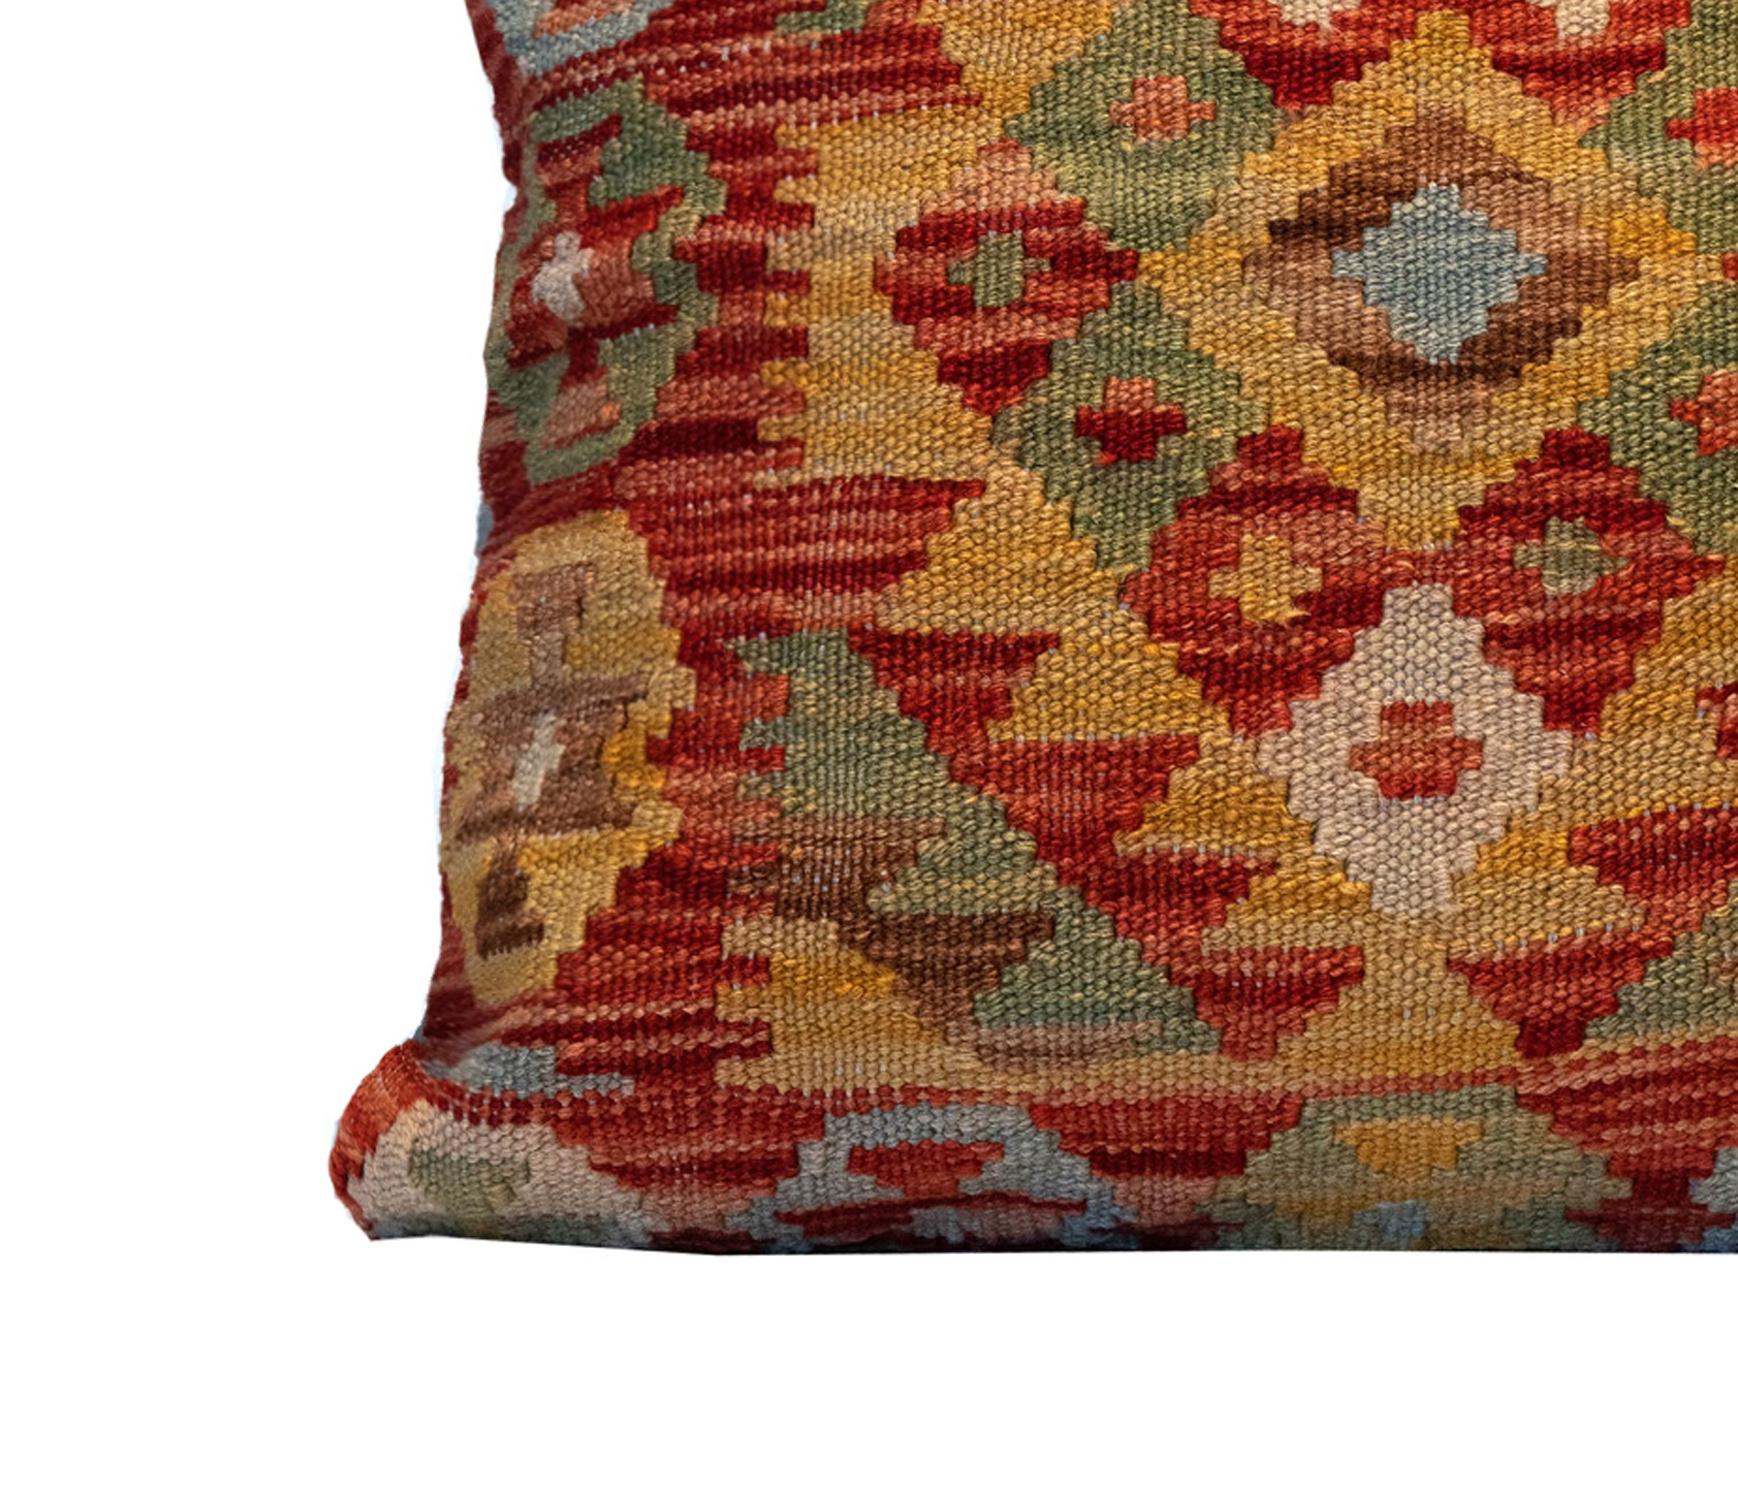 Vegetable Dyed Wool Cushion Cover, Kilims Handwoven Vintage Orange Beige Scatter Pillow